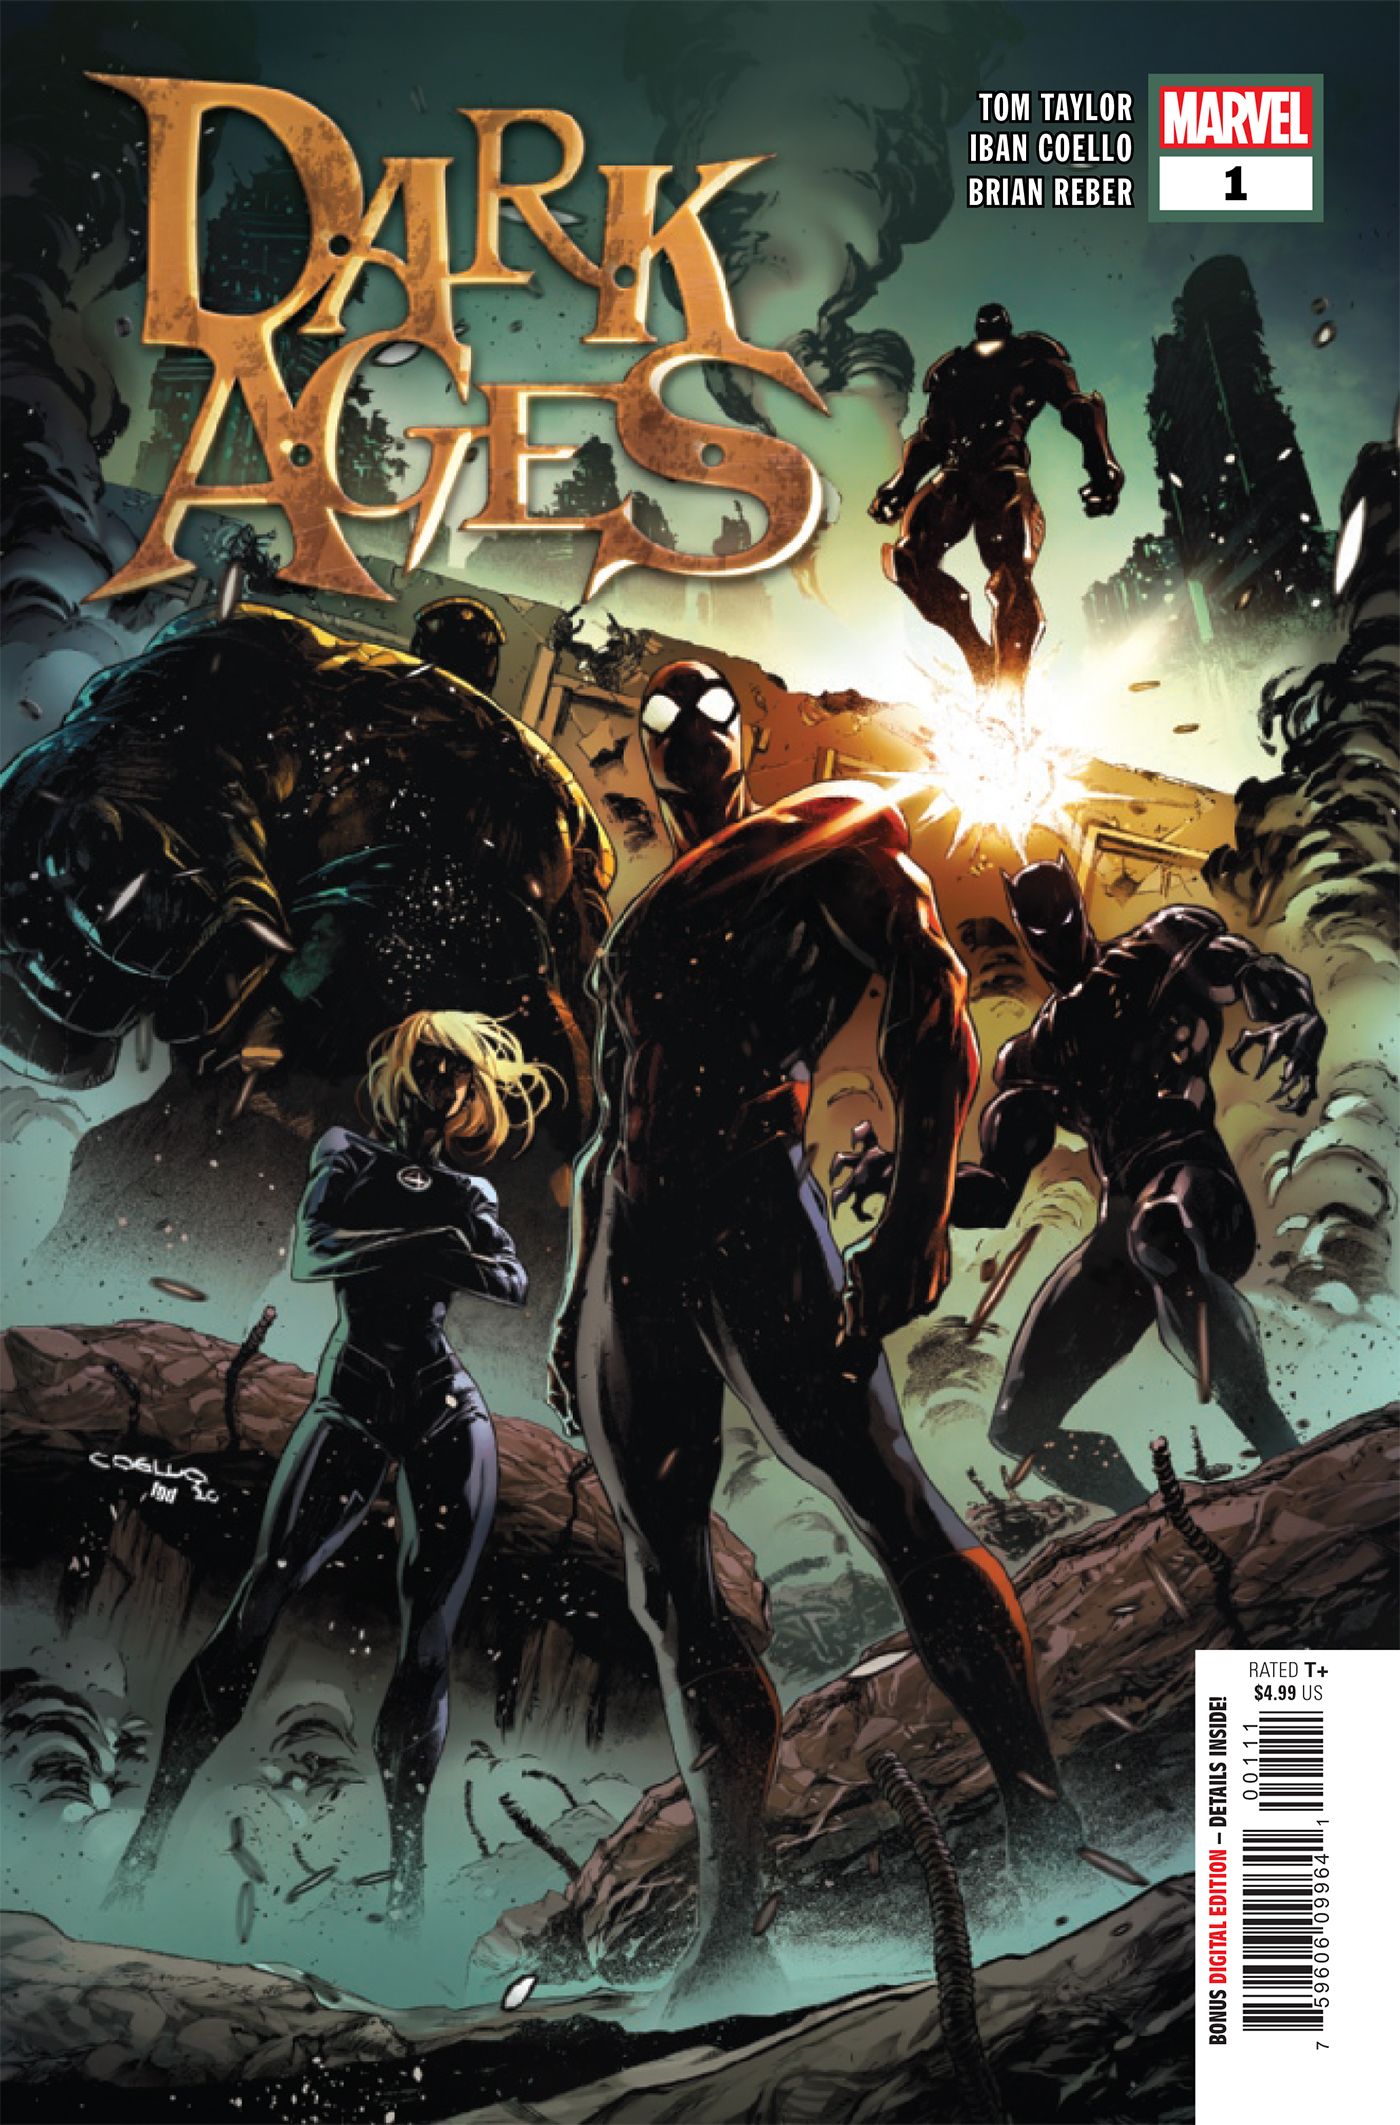 The cover for Dark Ages #1 sees the silhouettes of Earth's mightiest heroes.